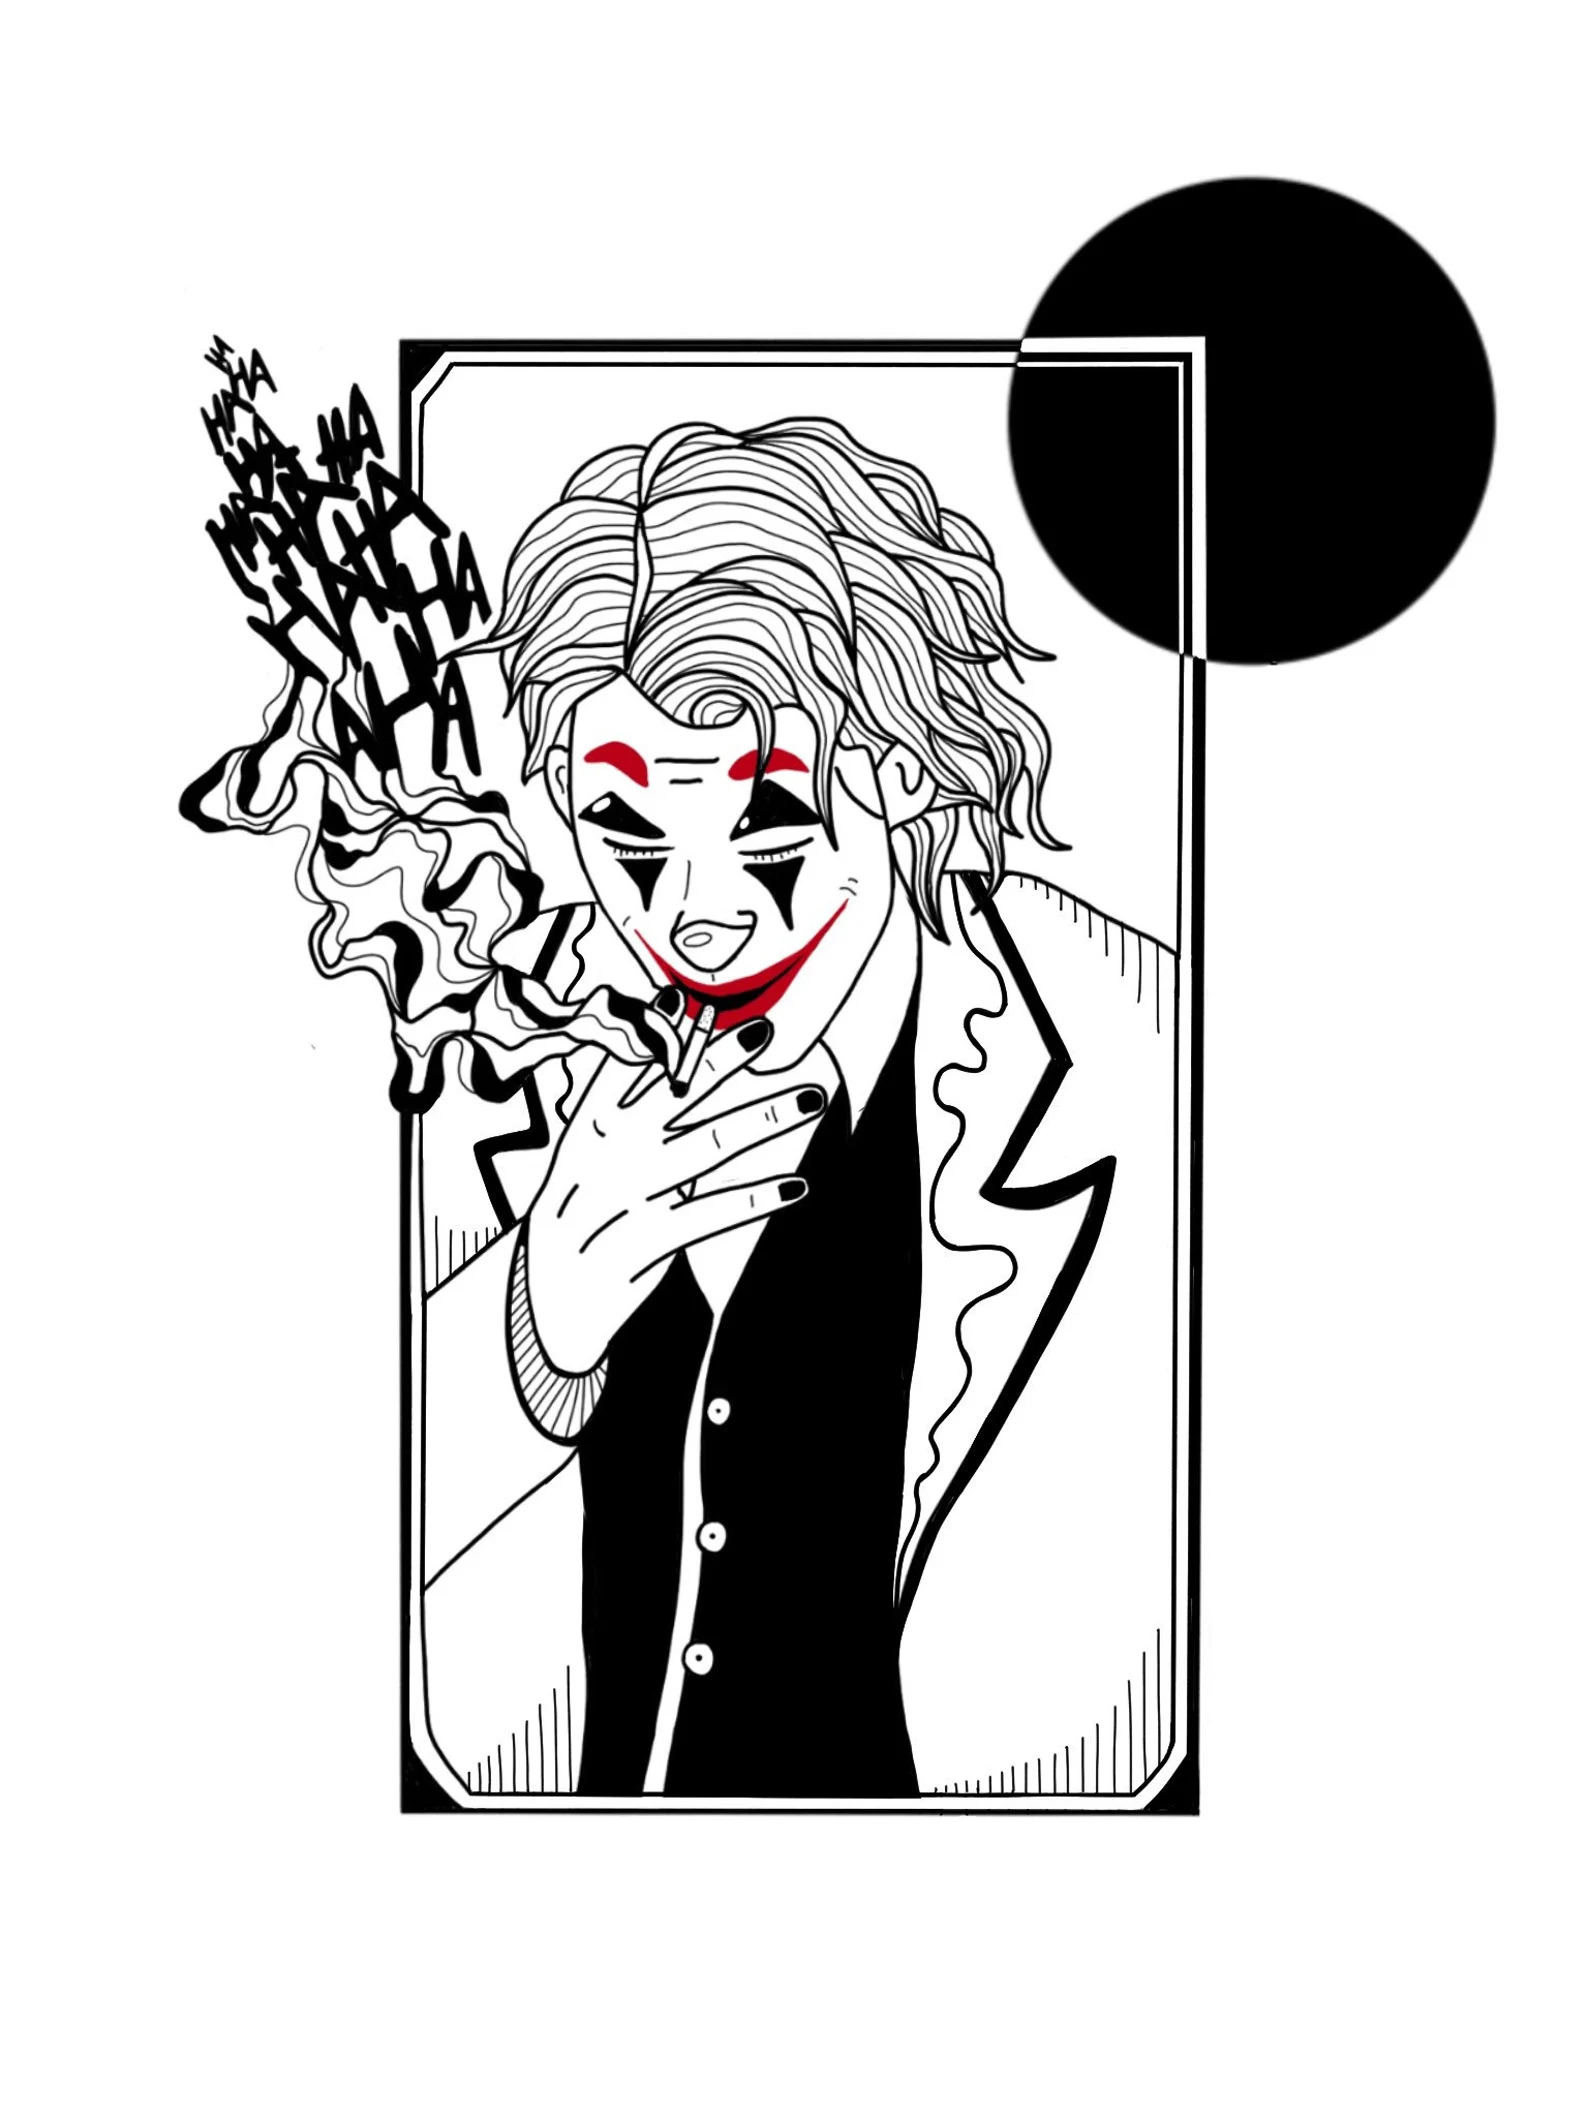 Classic Joker illustration in a hand drawn style.